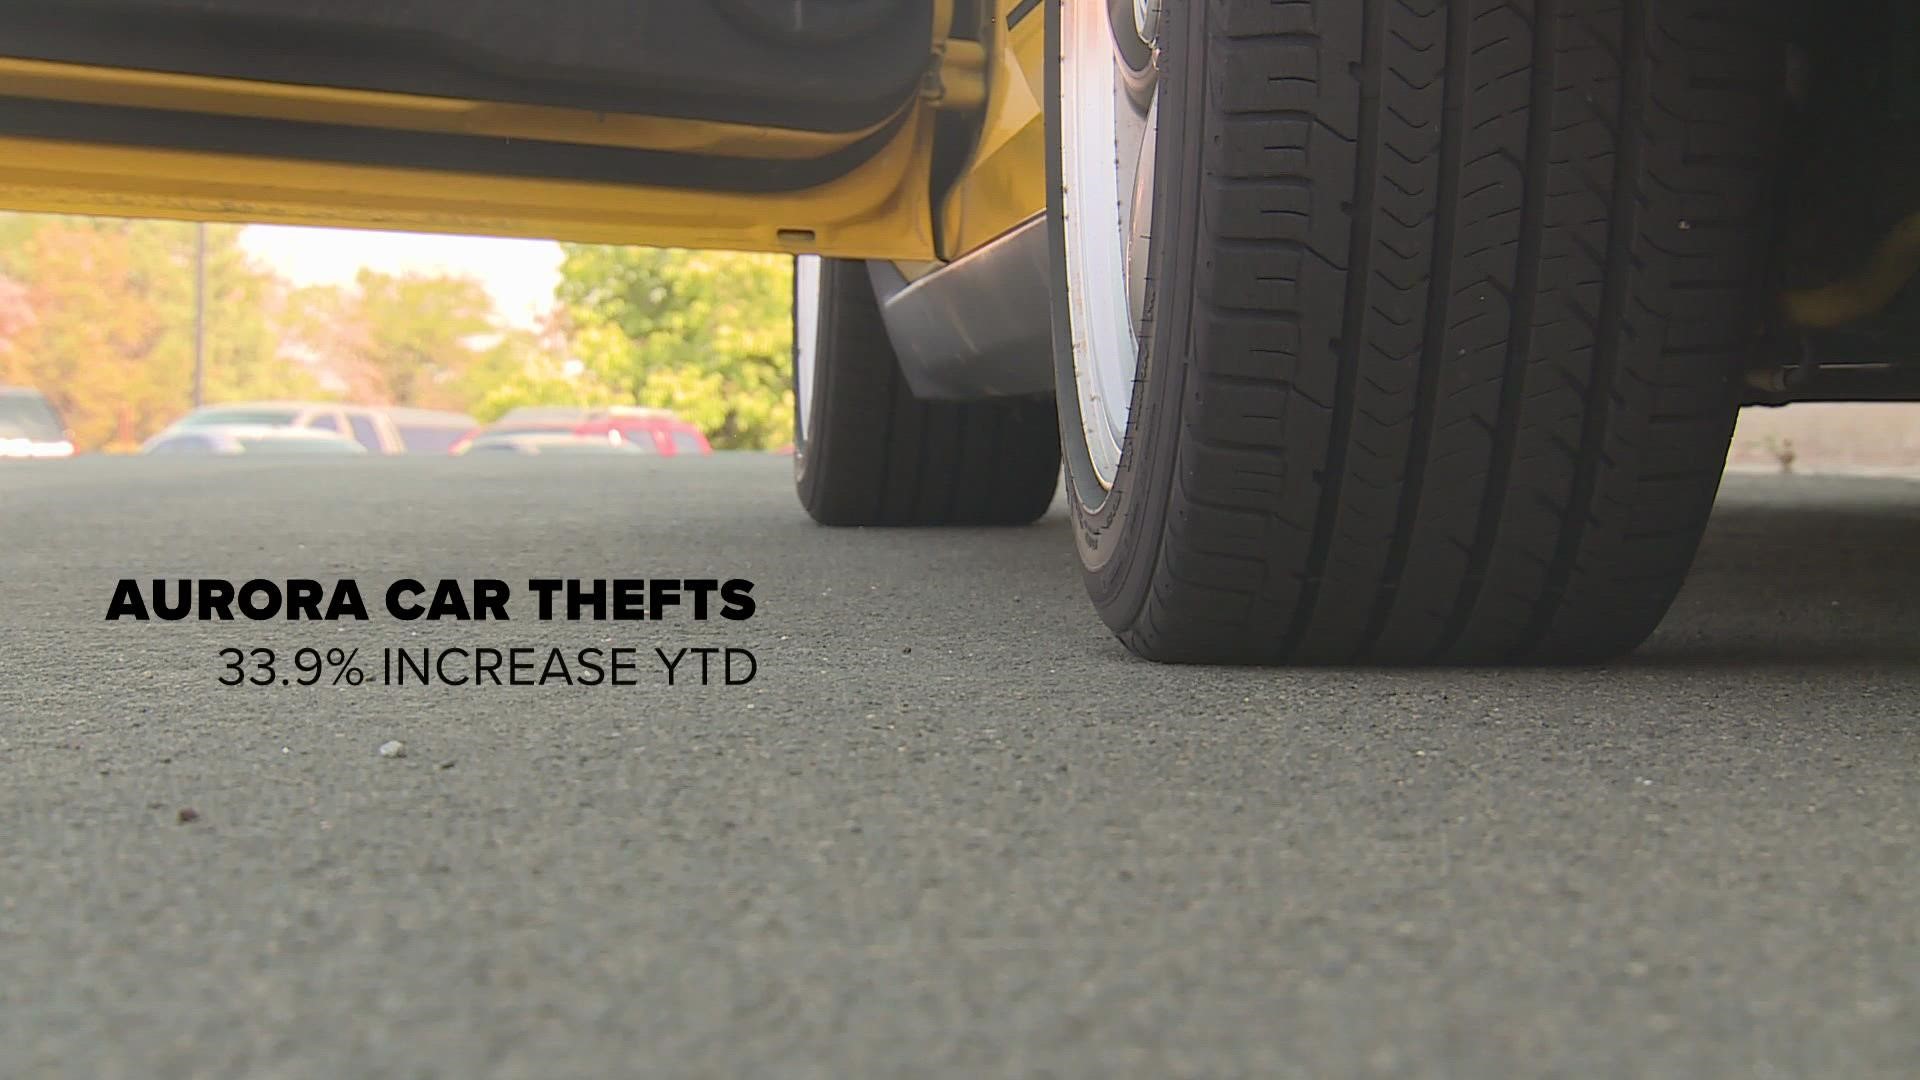 More than 30,000 cars have been stolen from the Denver metro area so far this year. That's a 20% increase from the same time period in 2021.